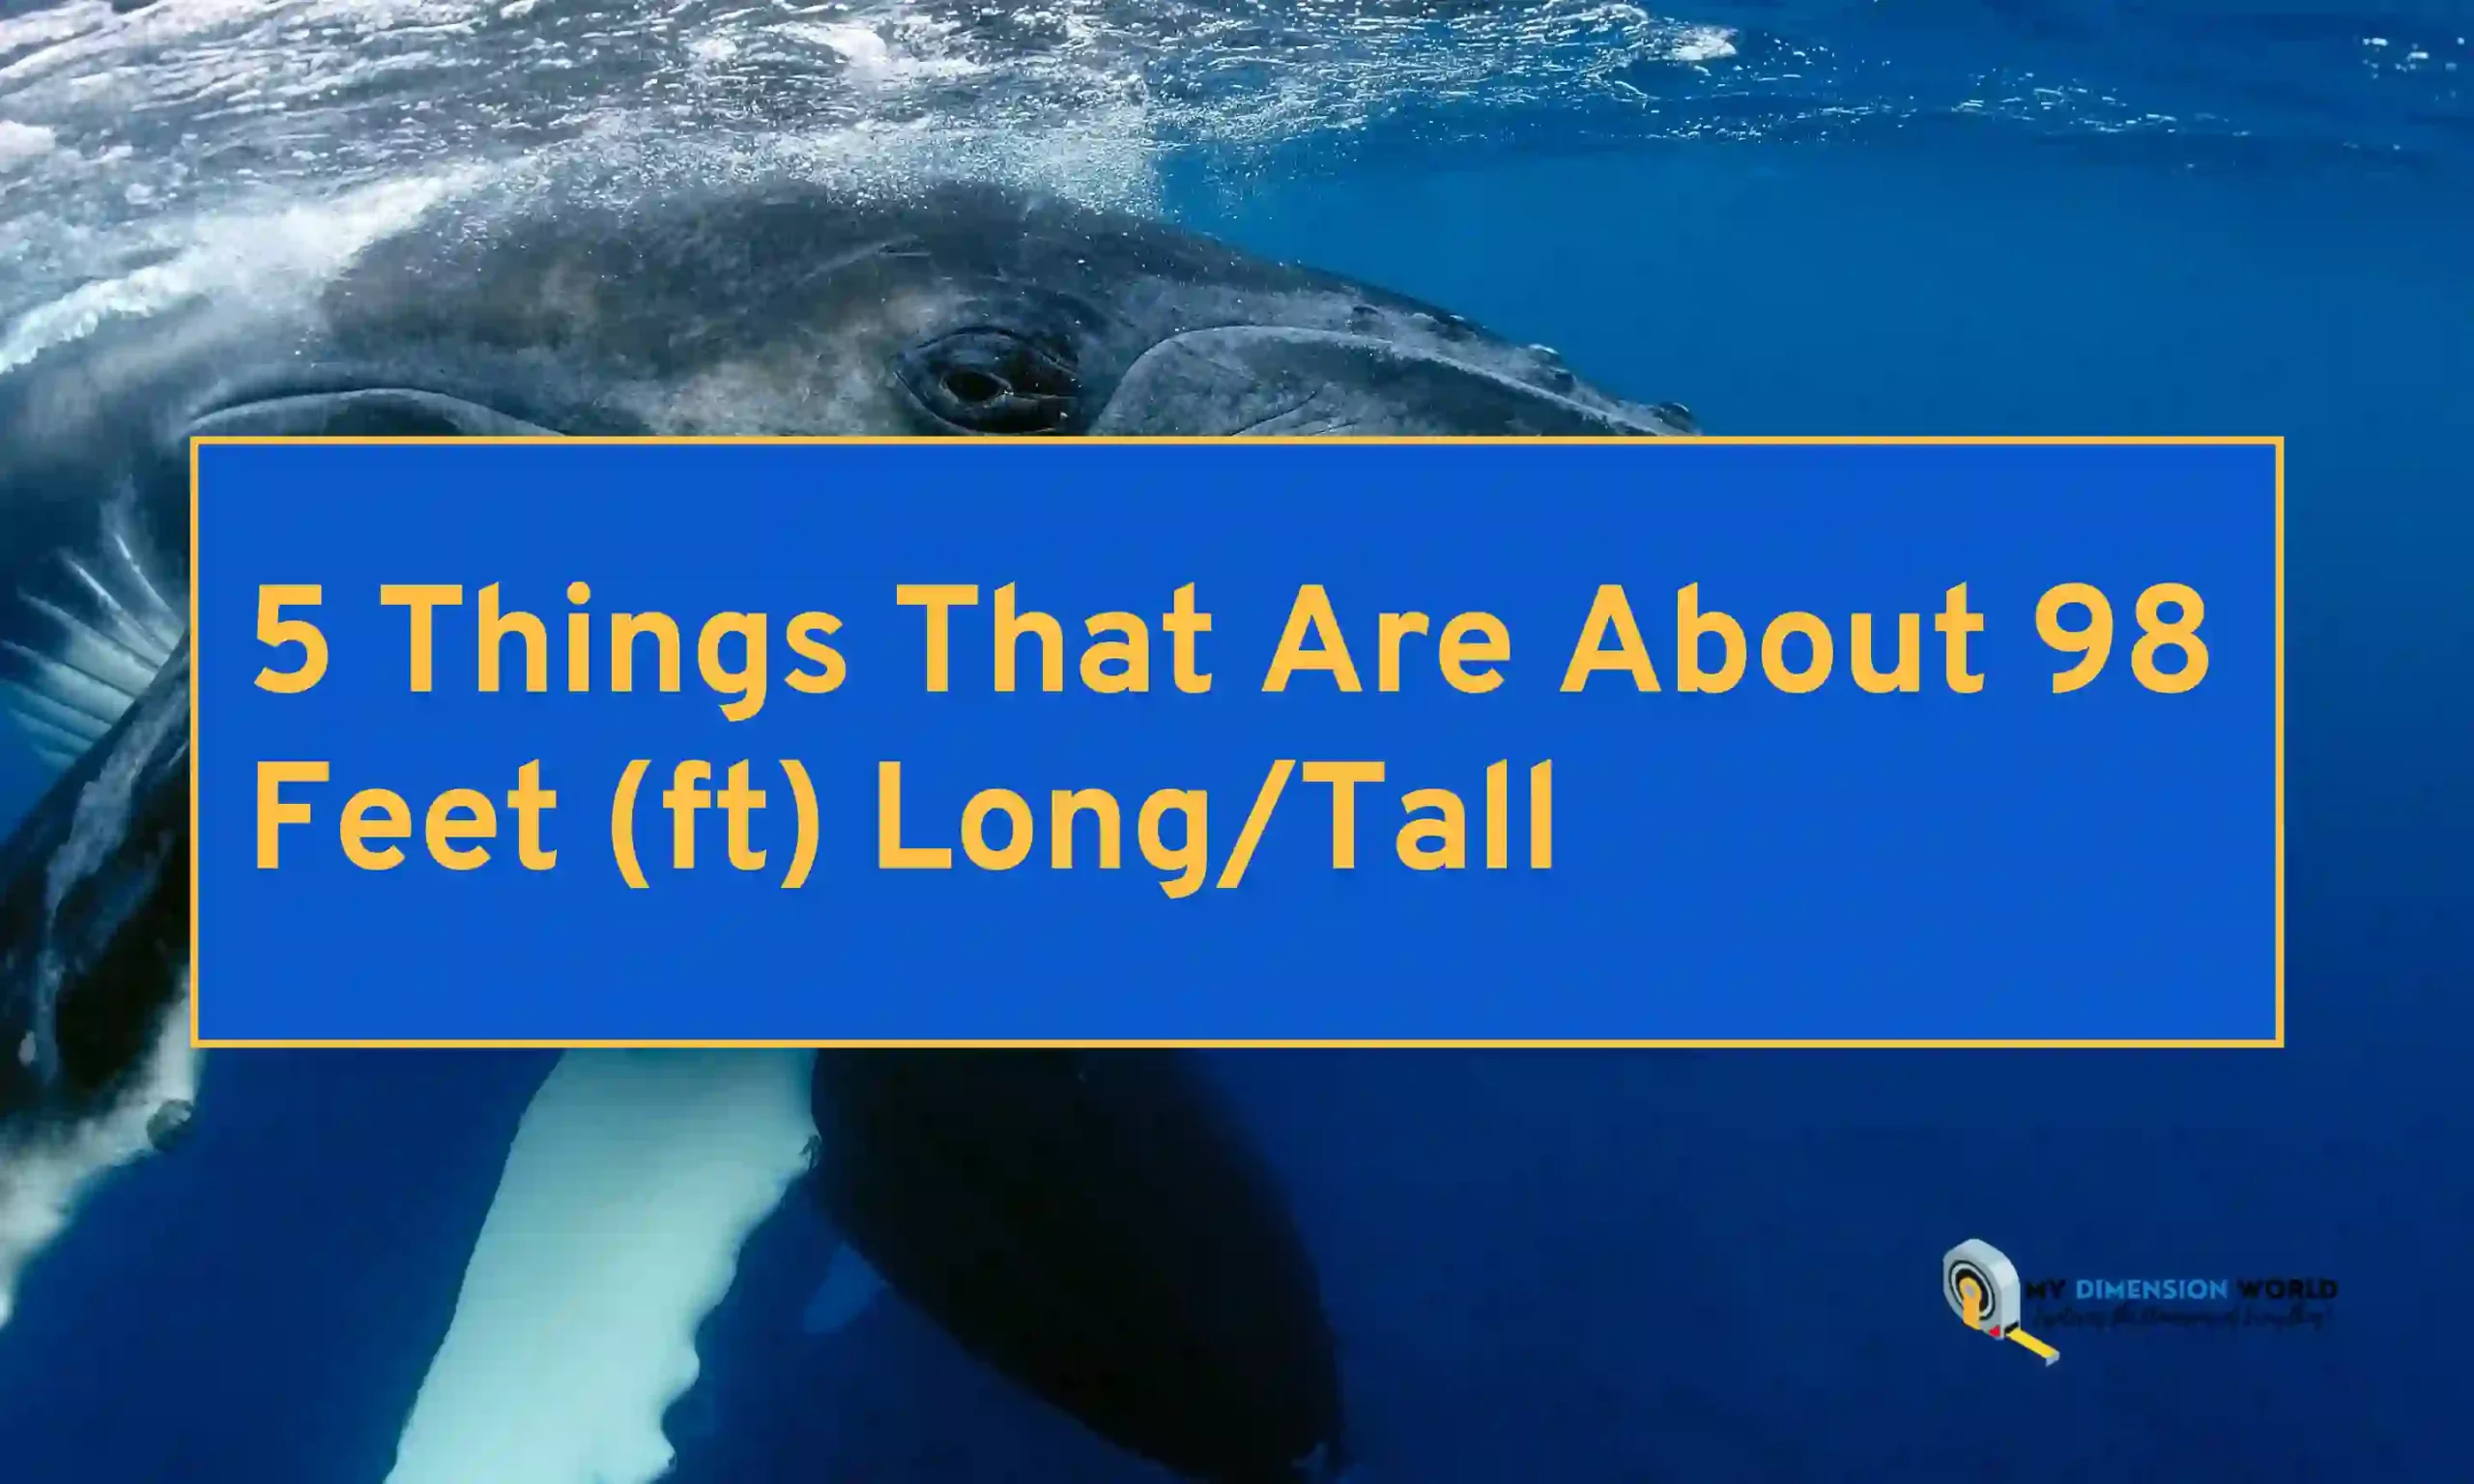 5 Things That Are About 98 Feet (ft) LongTall